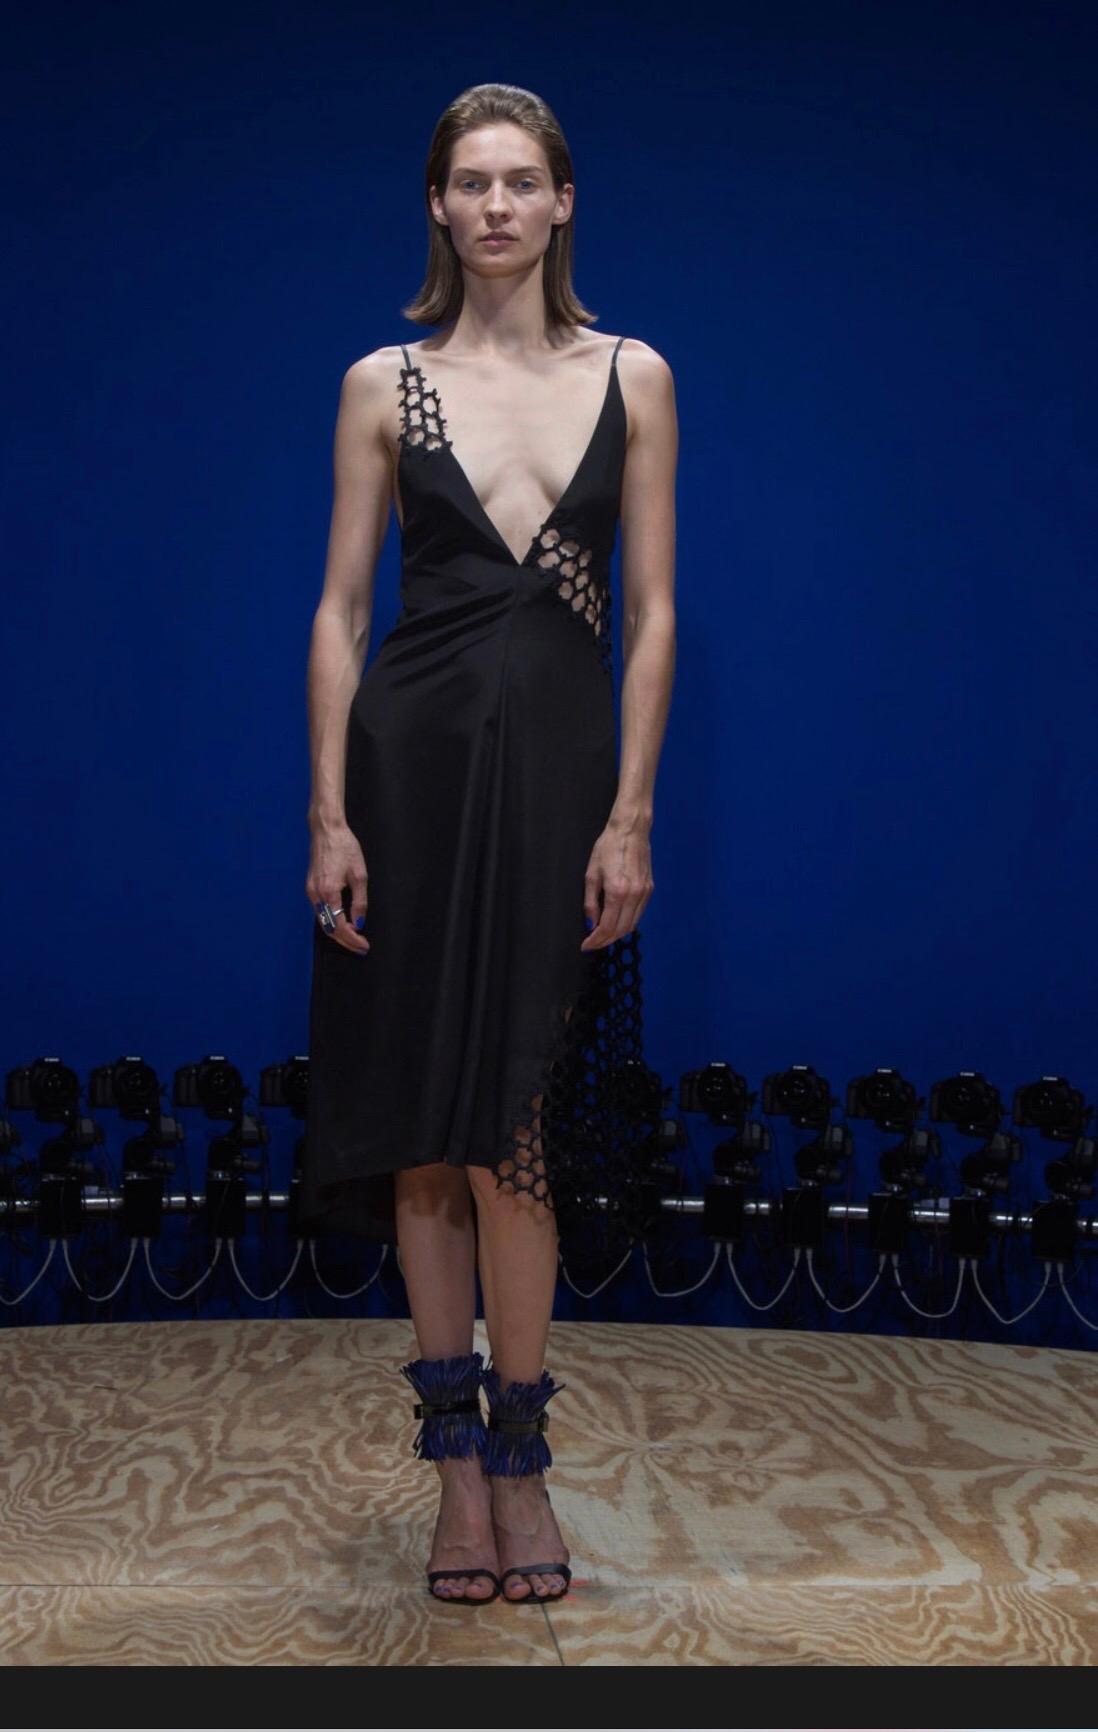 Chic REED KRAKOFF Runway Spring 2015 black and nude cut-out honeycomb dip hem halter minimalist dress! Features honeycomb cut-out details at side bust that is lined in nude silk. Matching honeycomb cut-outs at left hem reveal bare leg. Drapes the